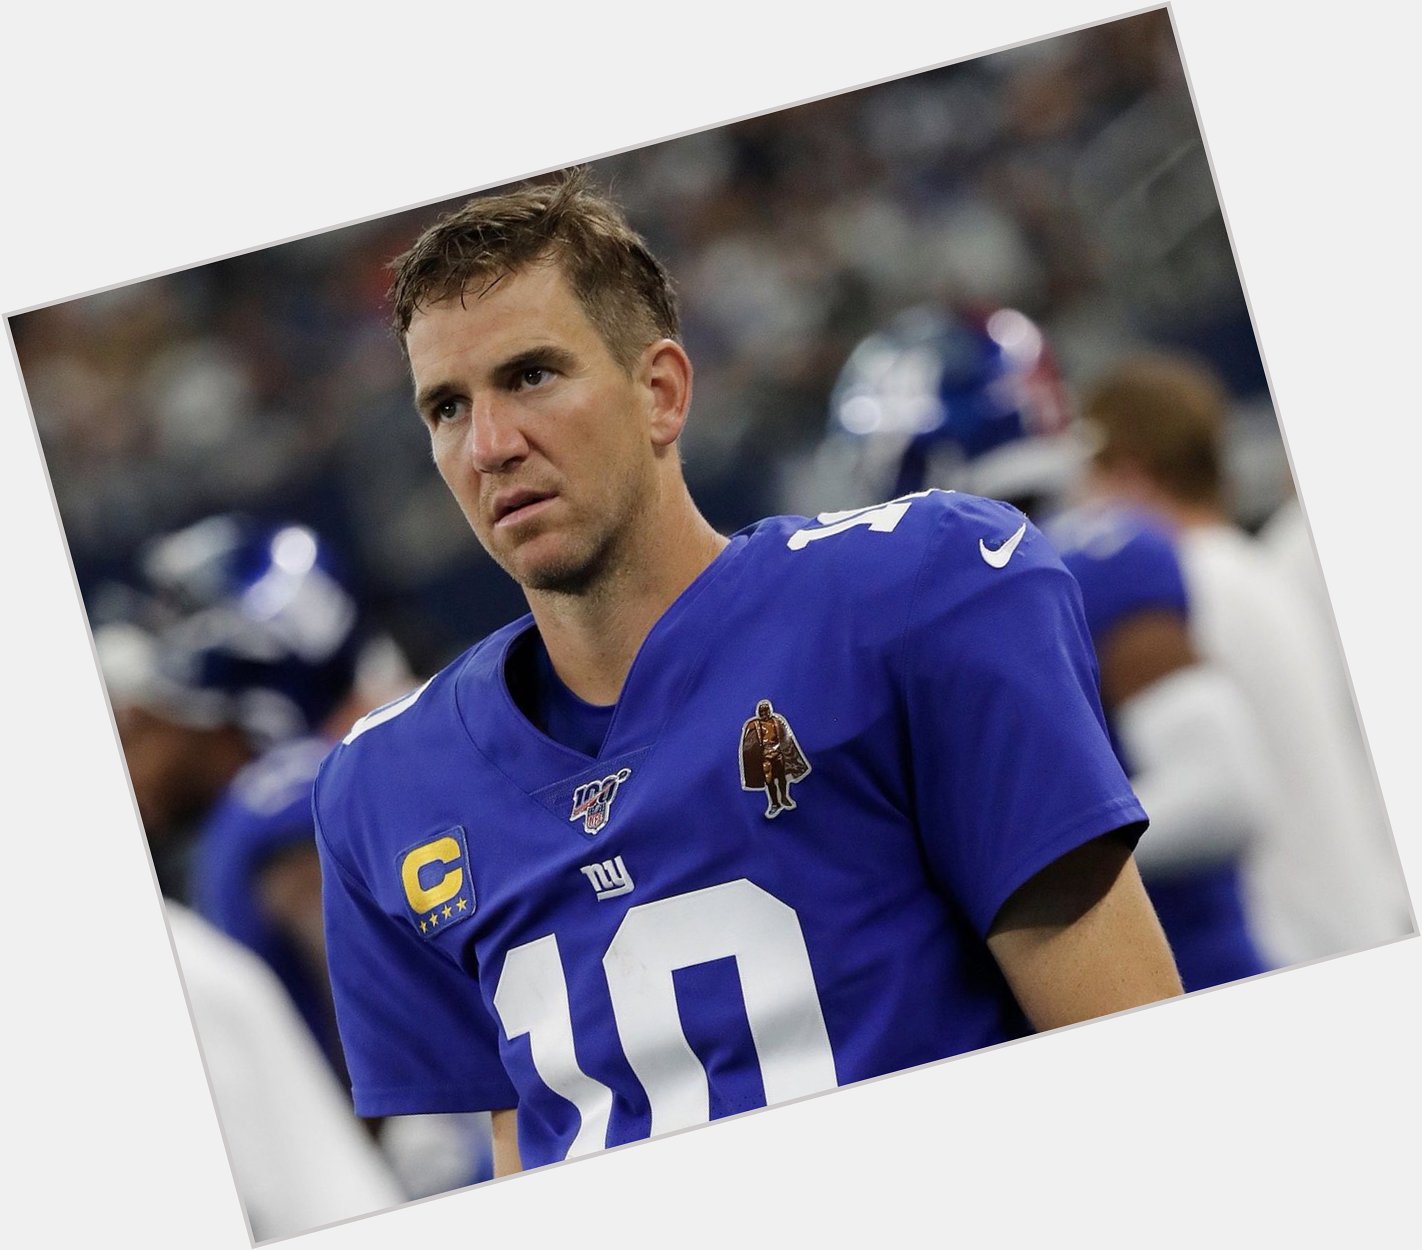 Today is Eli Manning s 39th birthday 
One like = one happy birthday to Eli 